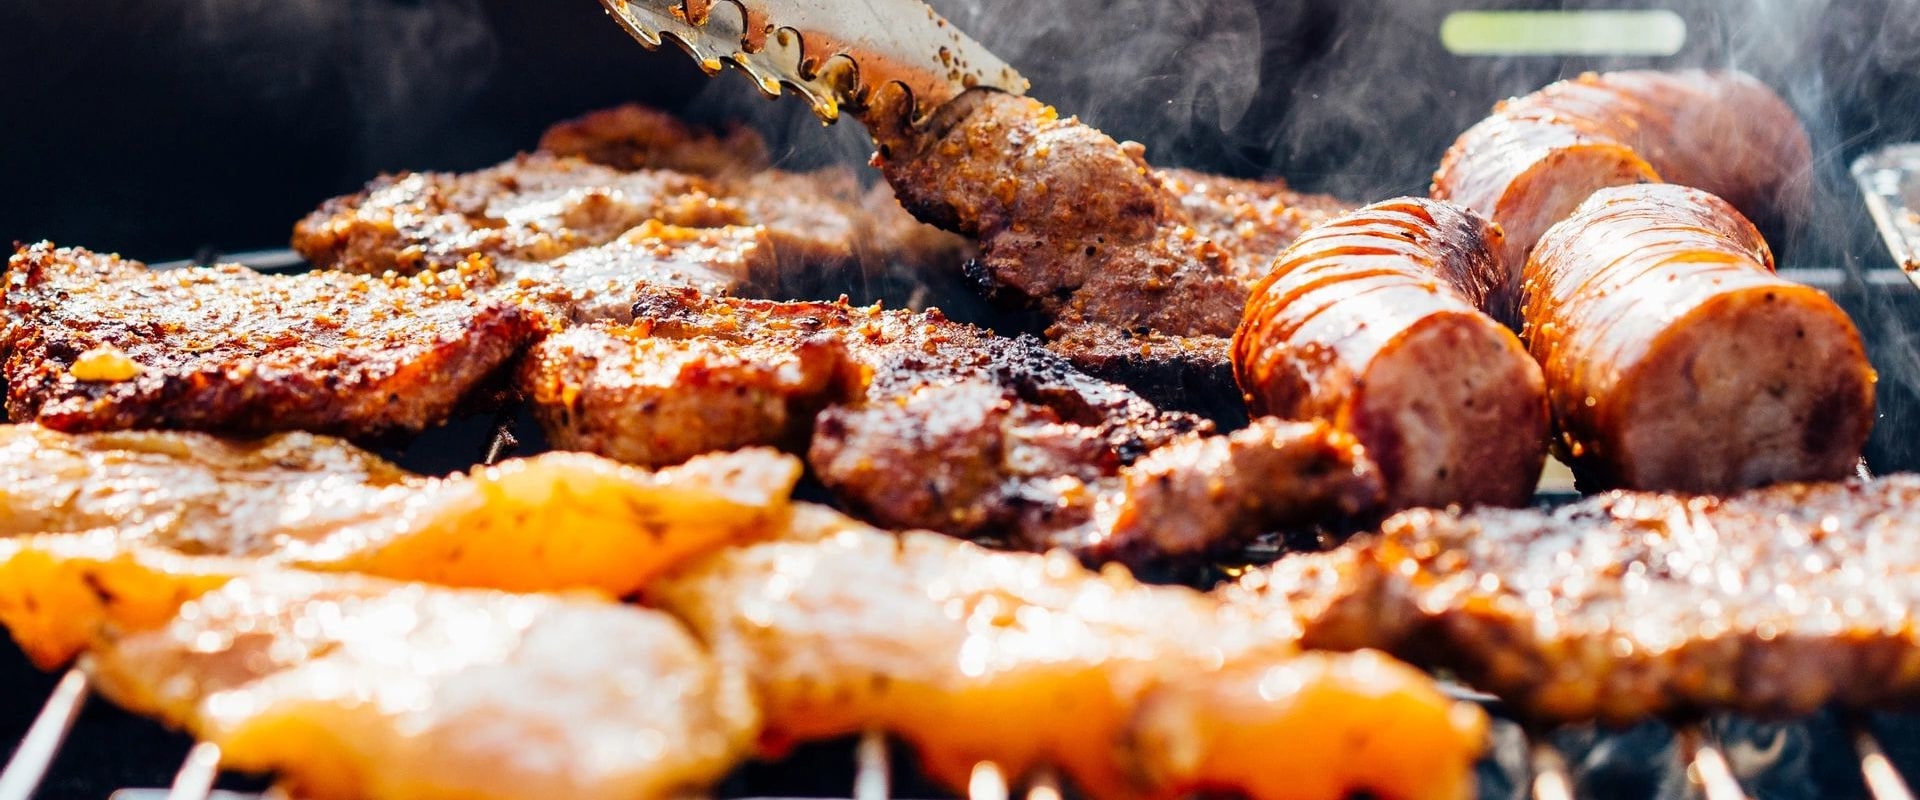 Grilling Techniques for Barbecuing in Fort Mill, SC - An Expert's Guide